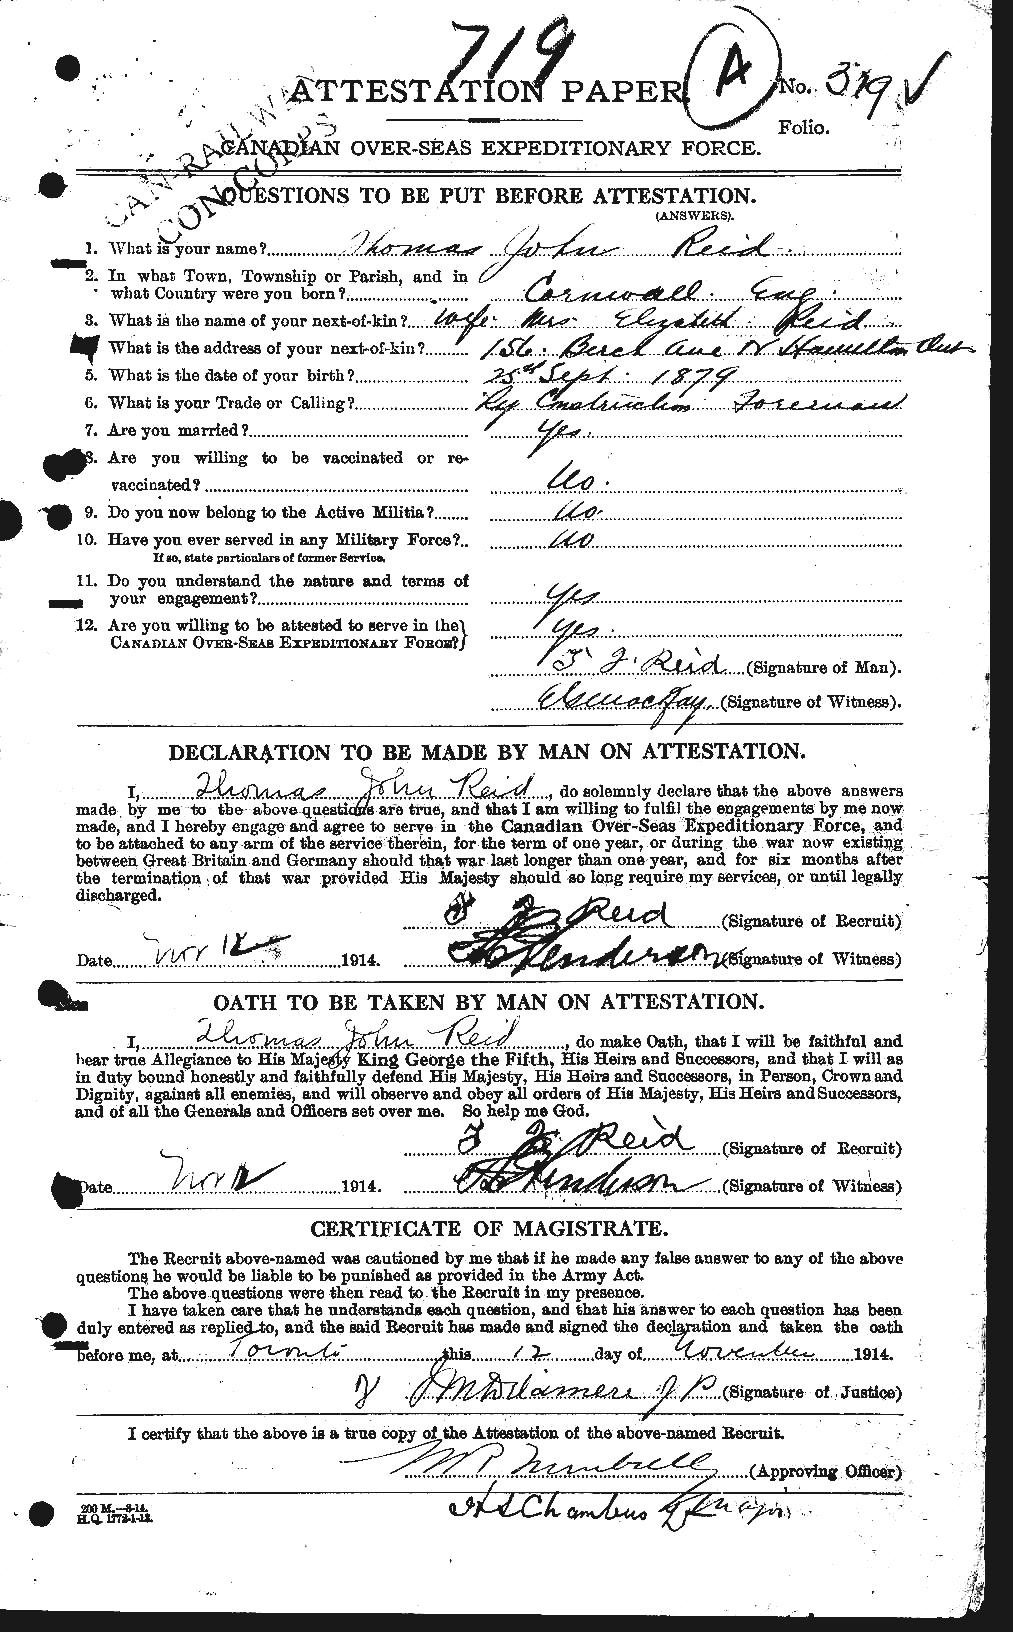 Personnel Records of the First World War - CEF 602001a